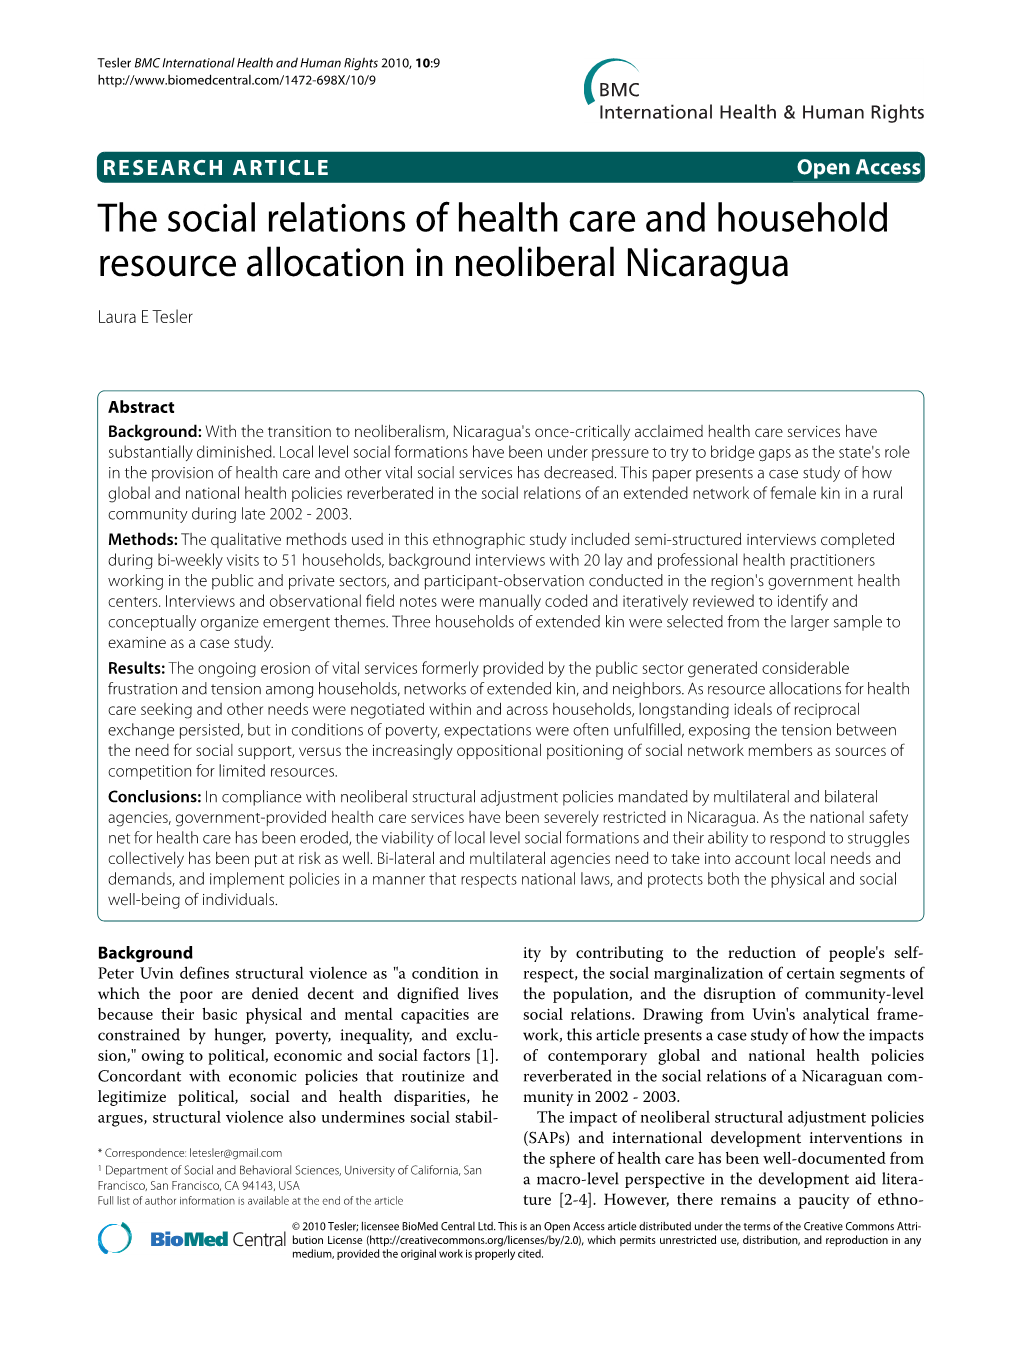 The Social Relations of Health Care and Household Resource Allocation in Neoliberal Nicaragua BMC International Health and Human Rights 2010, 10:9